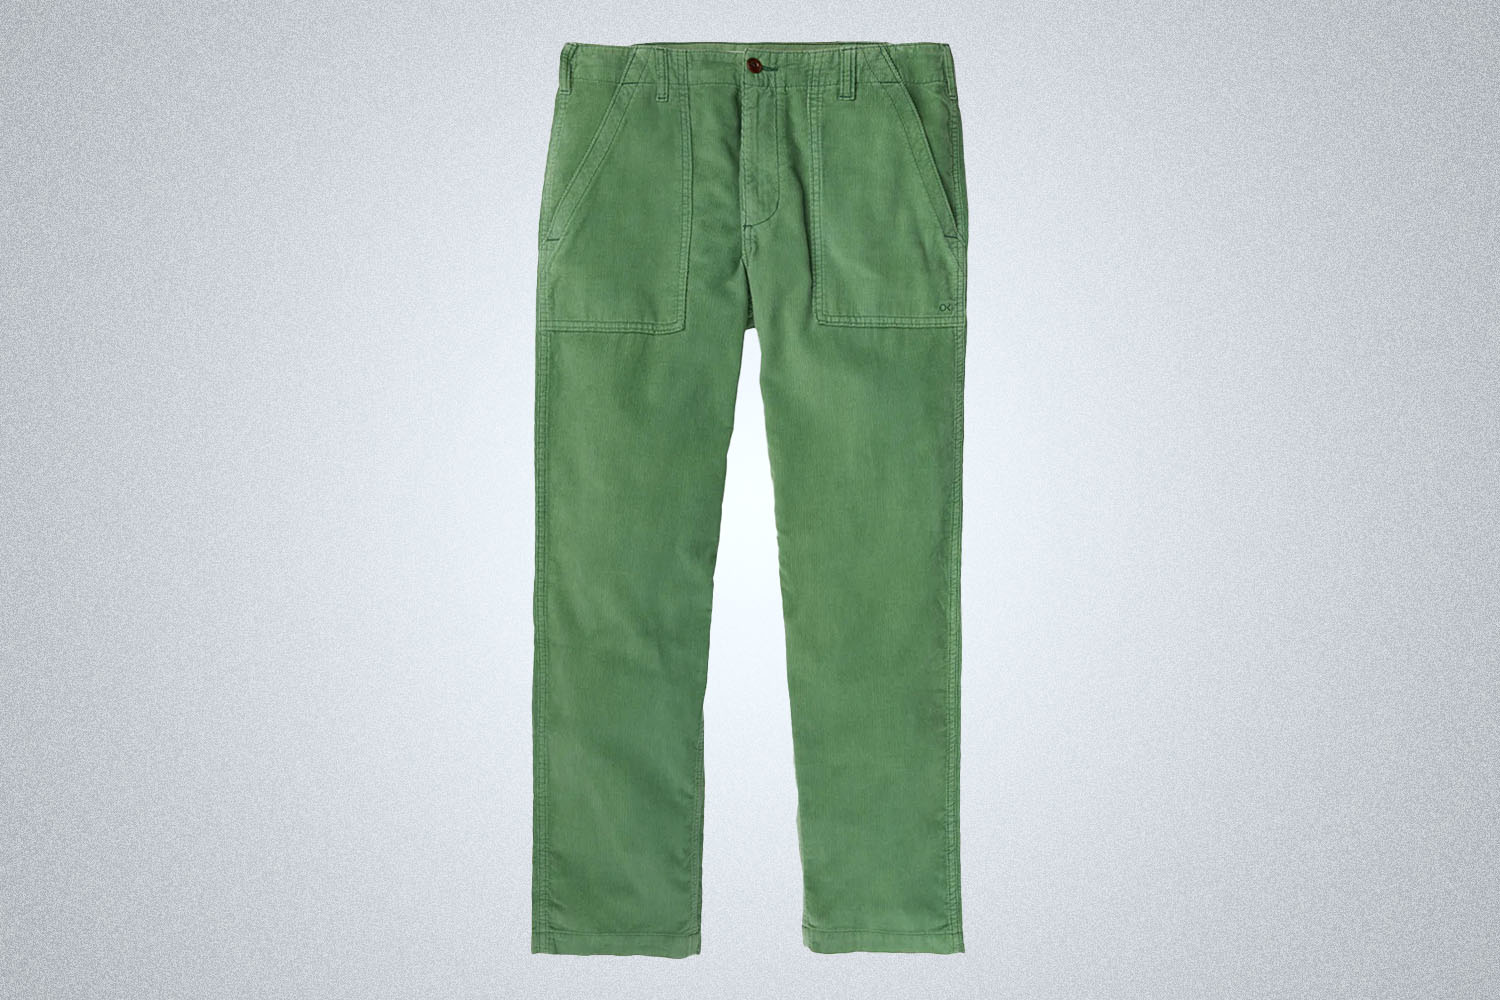 a pair of light green Outerknown corduroy pants on a grey background